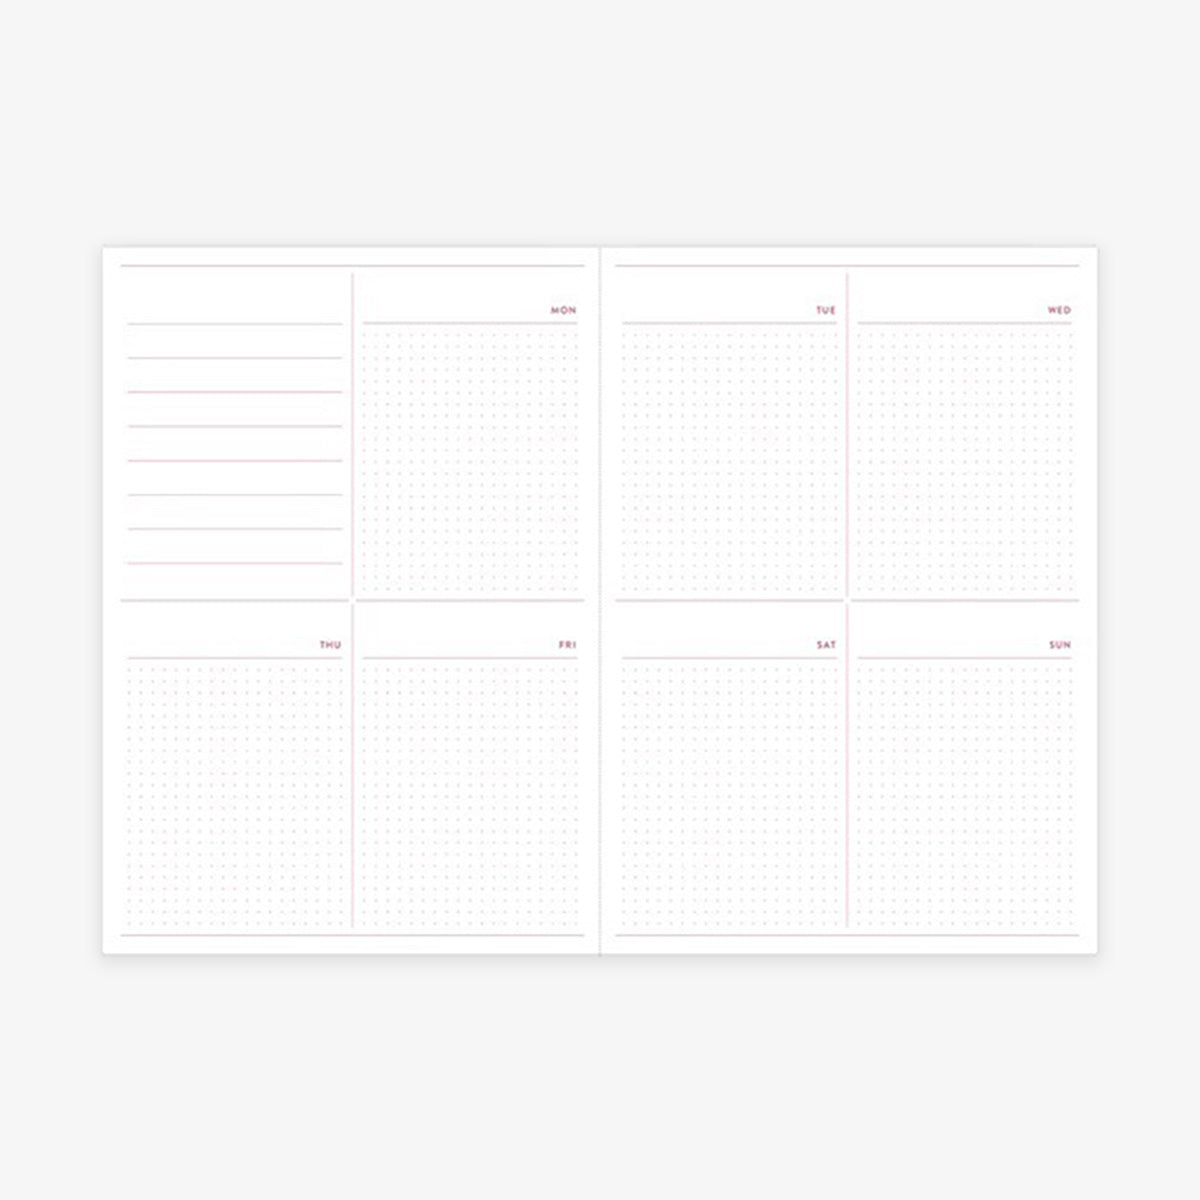 FIND & NOTICE WEEKLY PLANNER DIARY // PINK